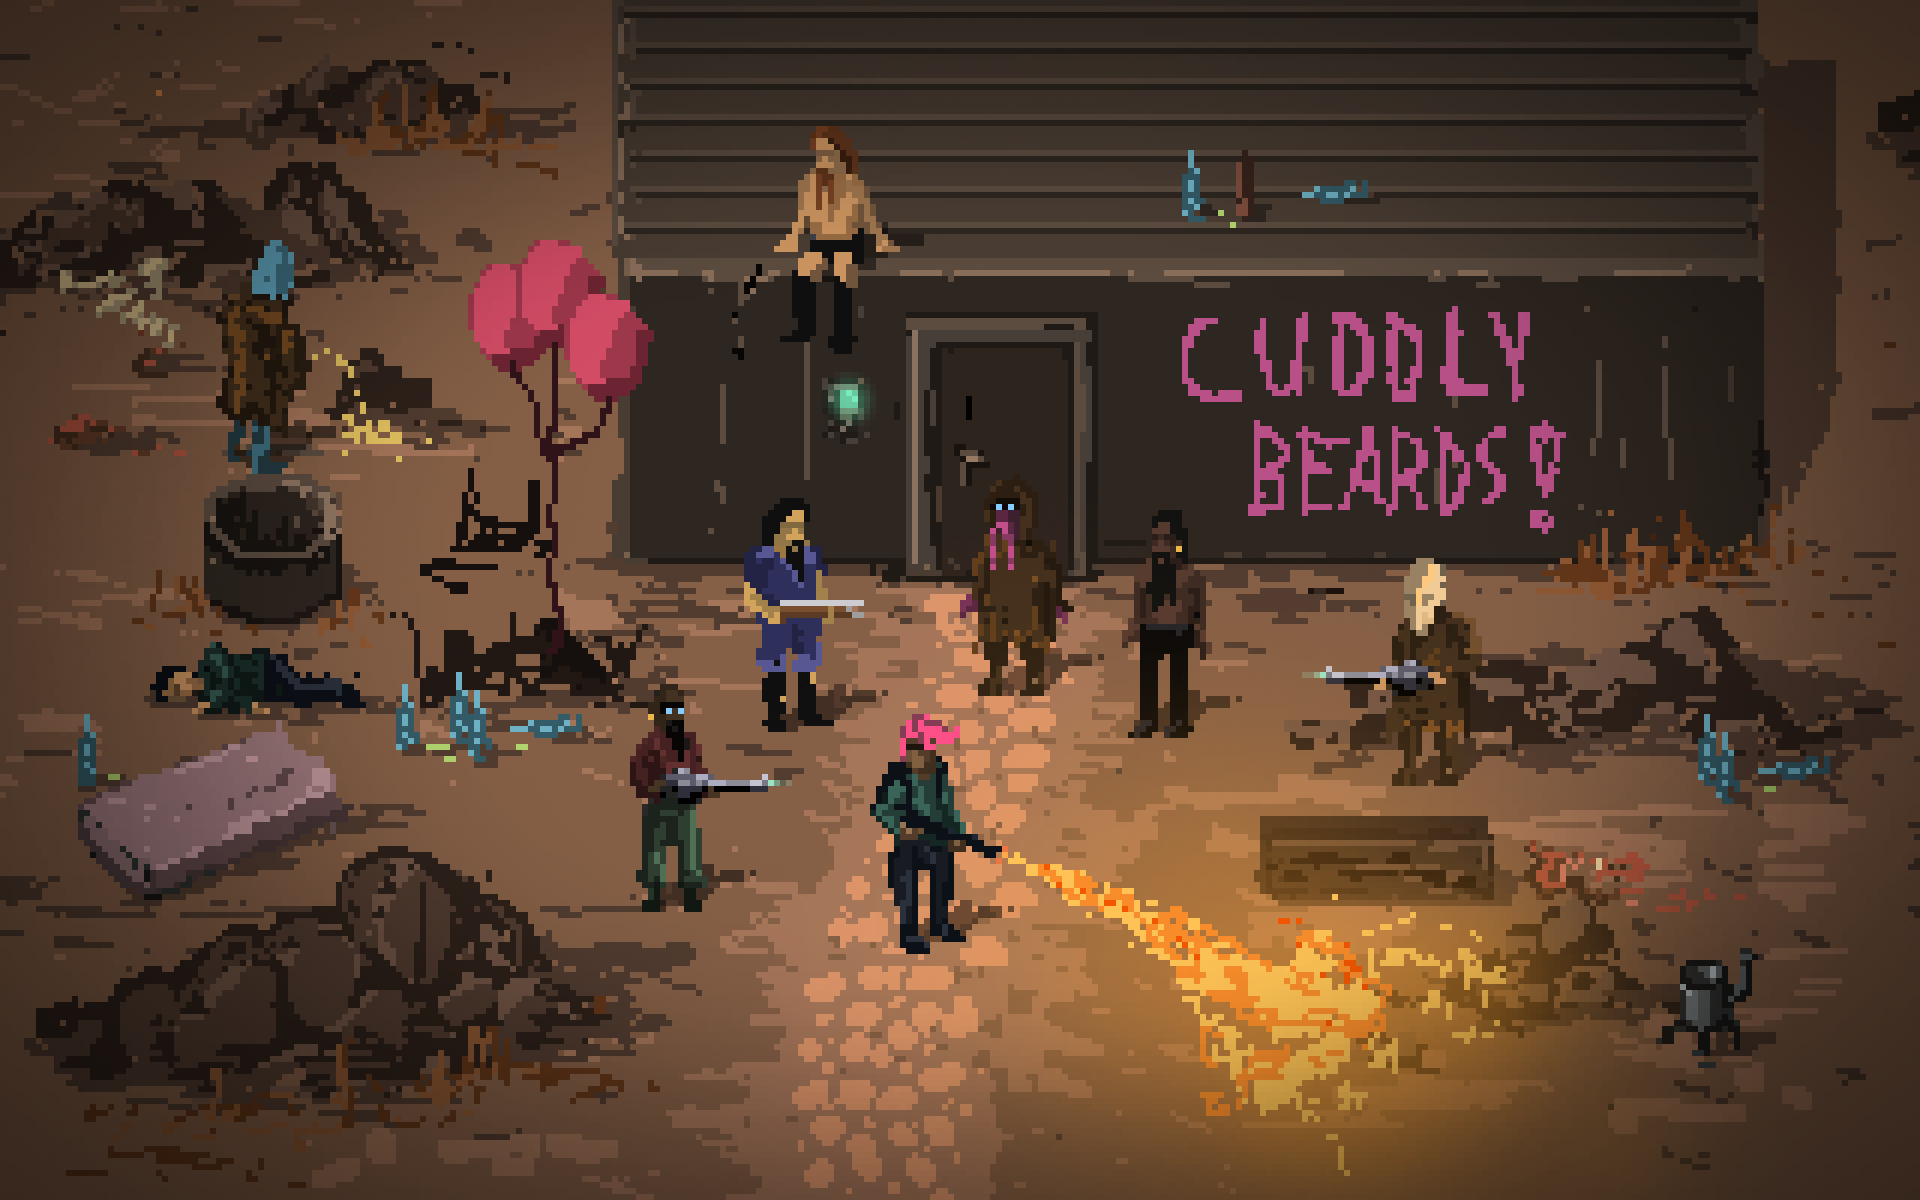 Post-apocalyptic RPG Death Trash looks seriously cool